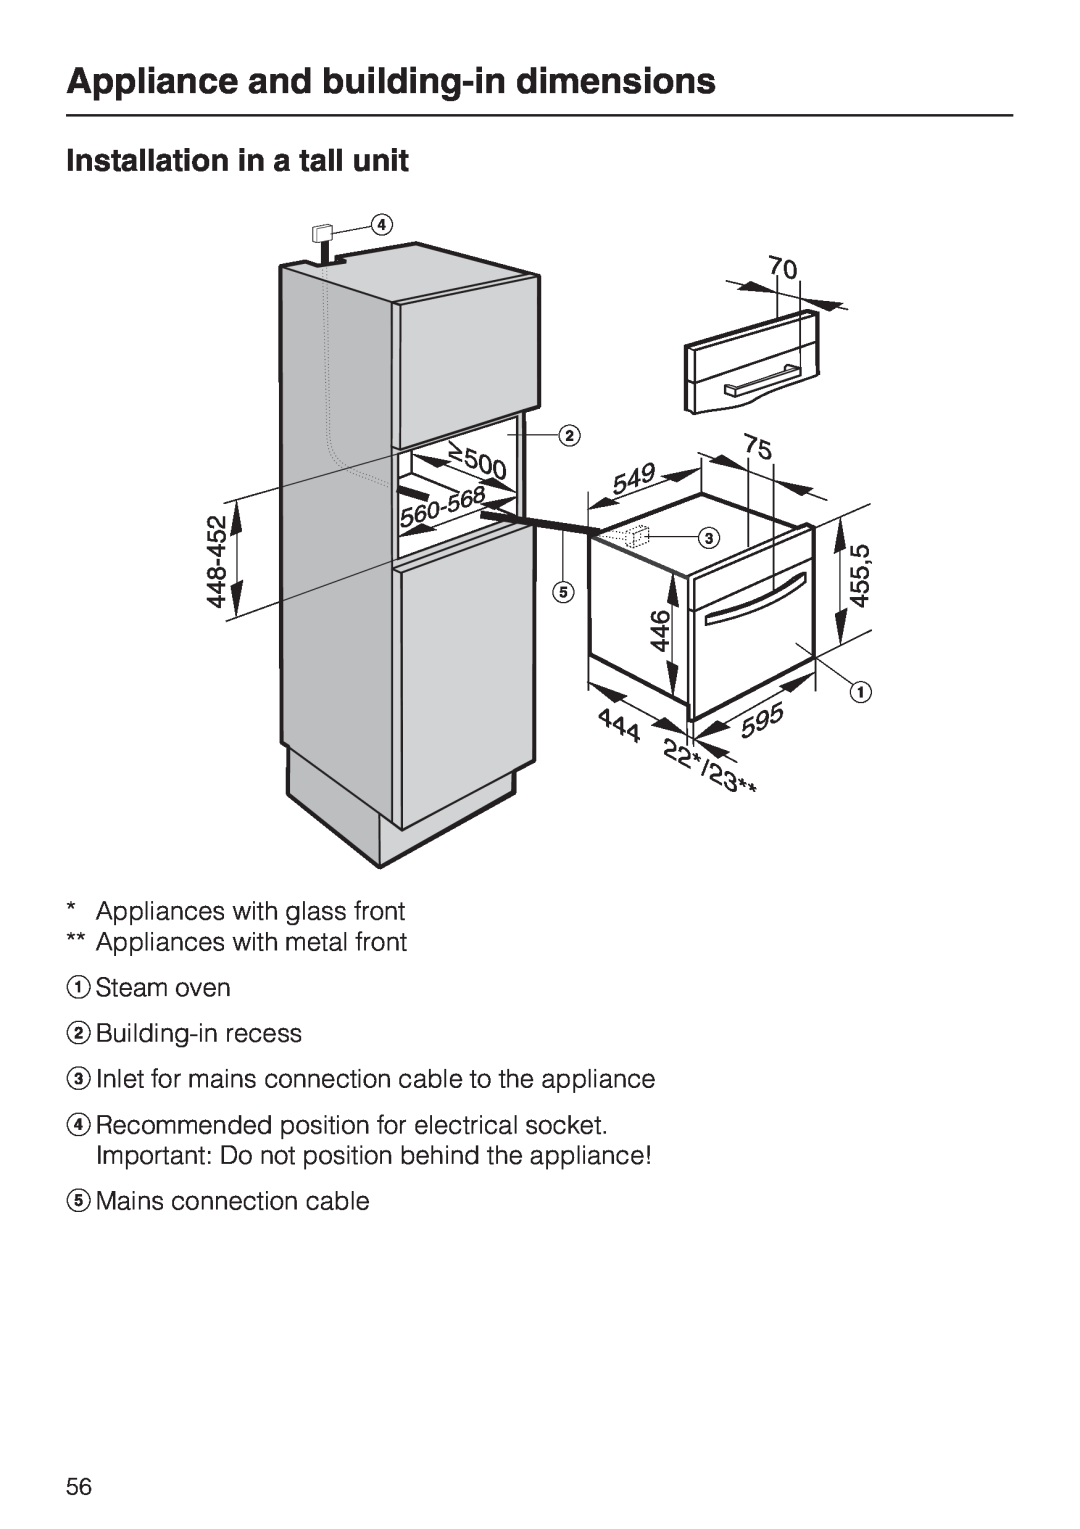 Miele DG 5080, DG 5070, DG 5088 Appliance and building-in dimensions, Installation in a tall unit, 22*/23, 455,5 